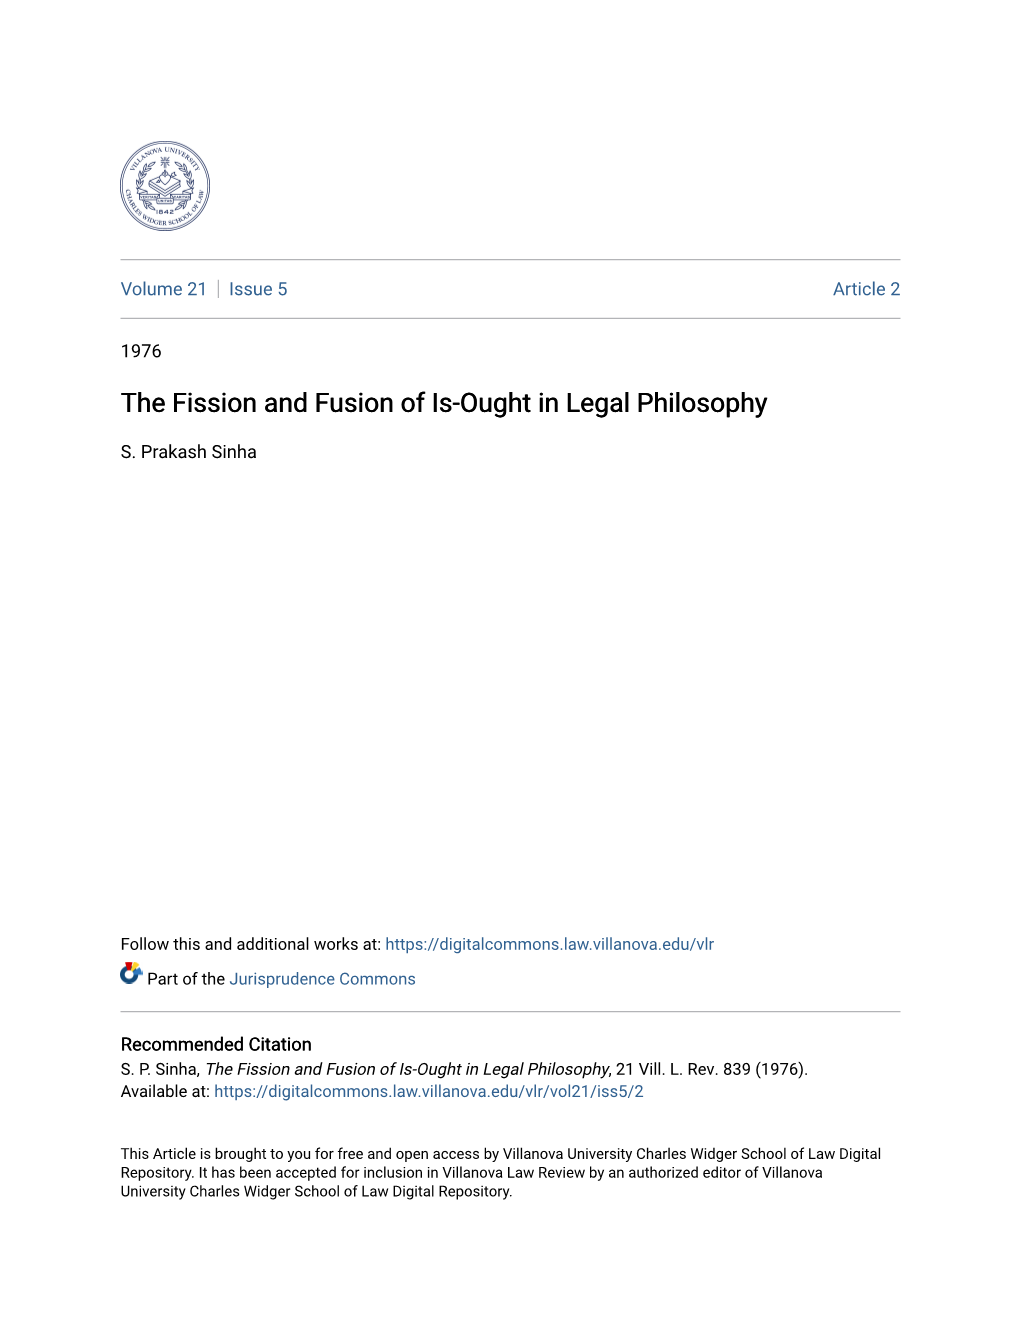 The Fission and Fusion of Is-Ought in Legal Philosophy